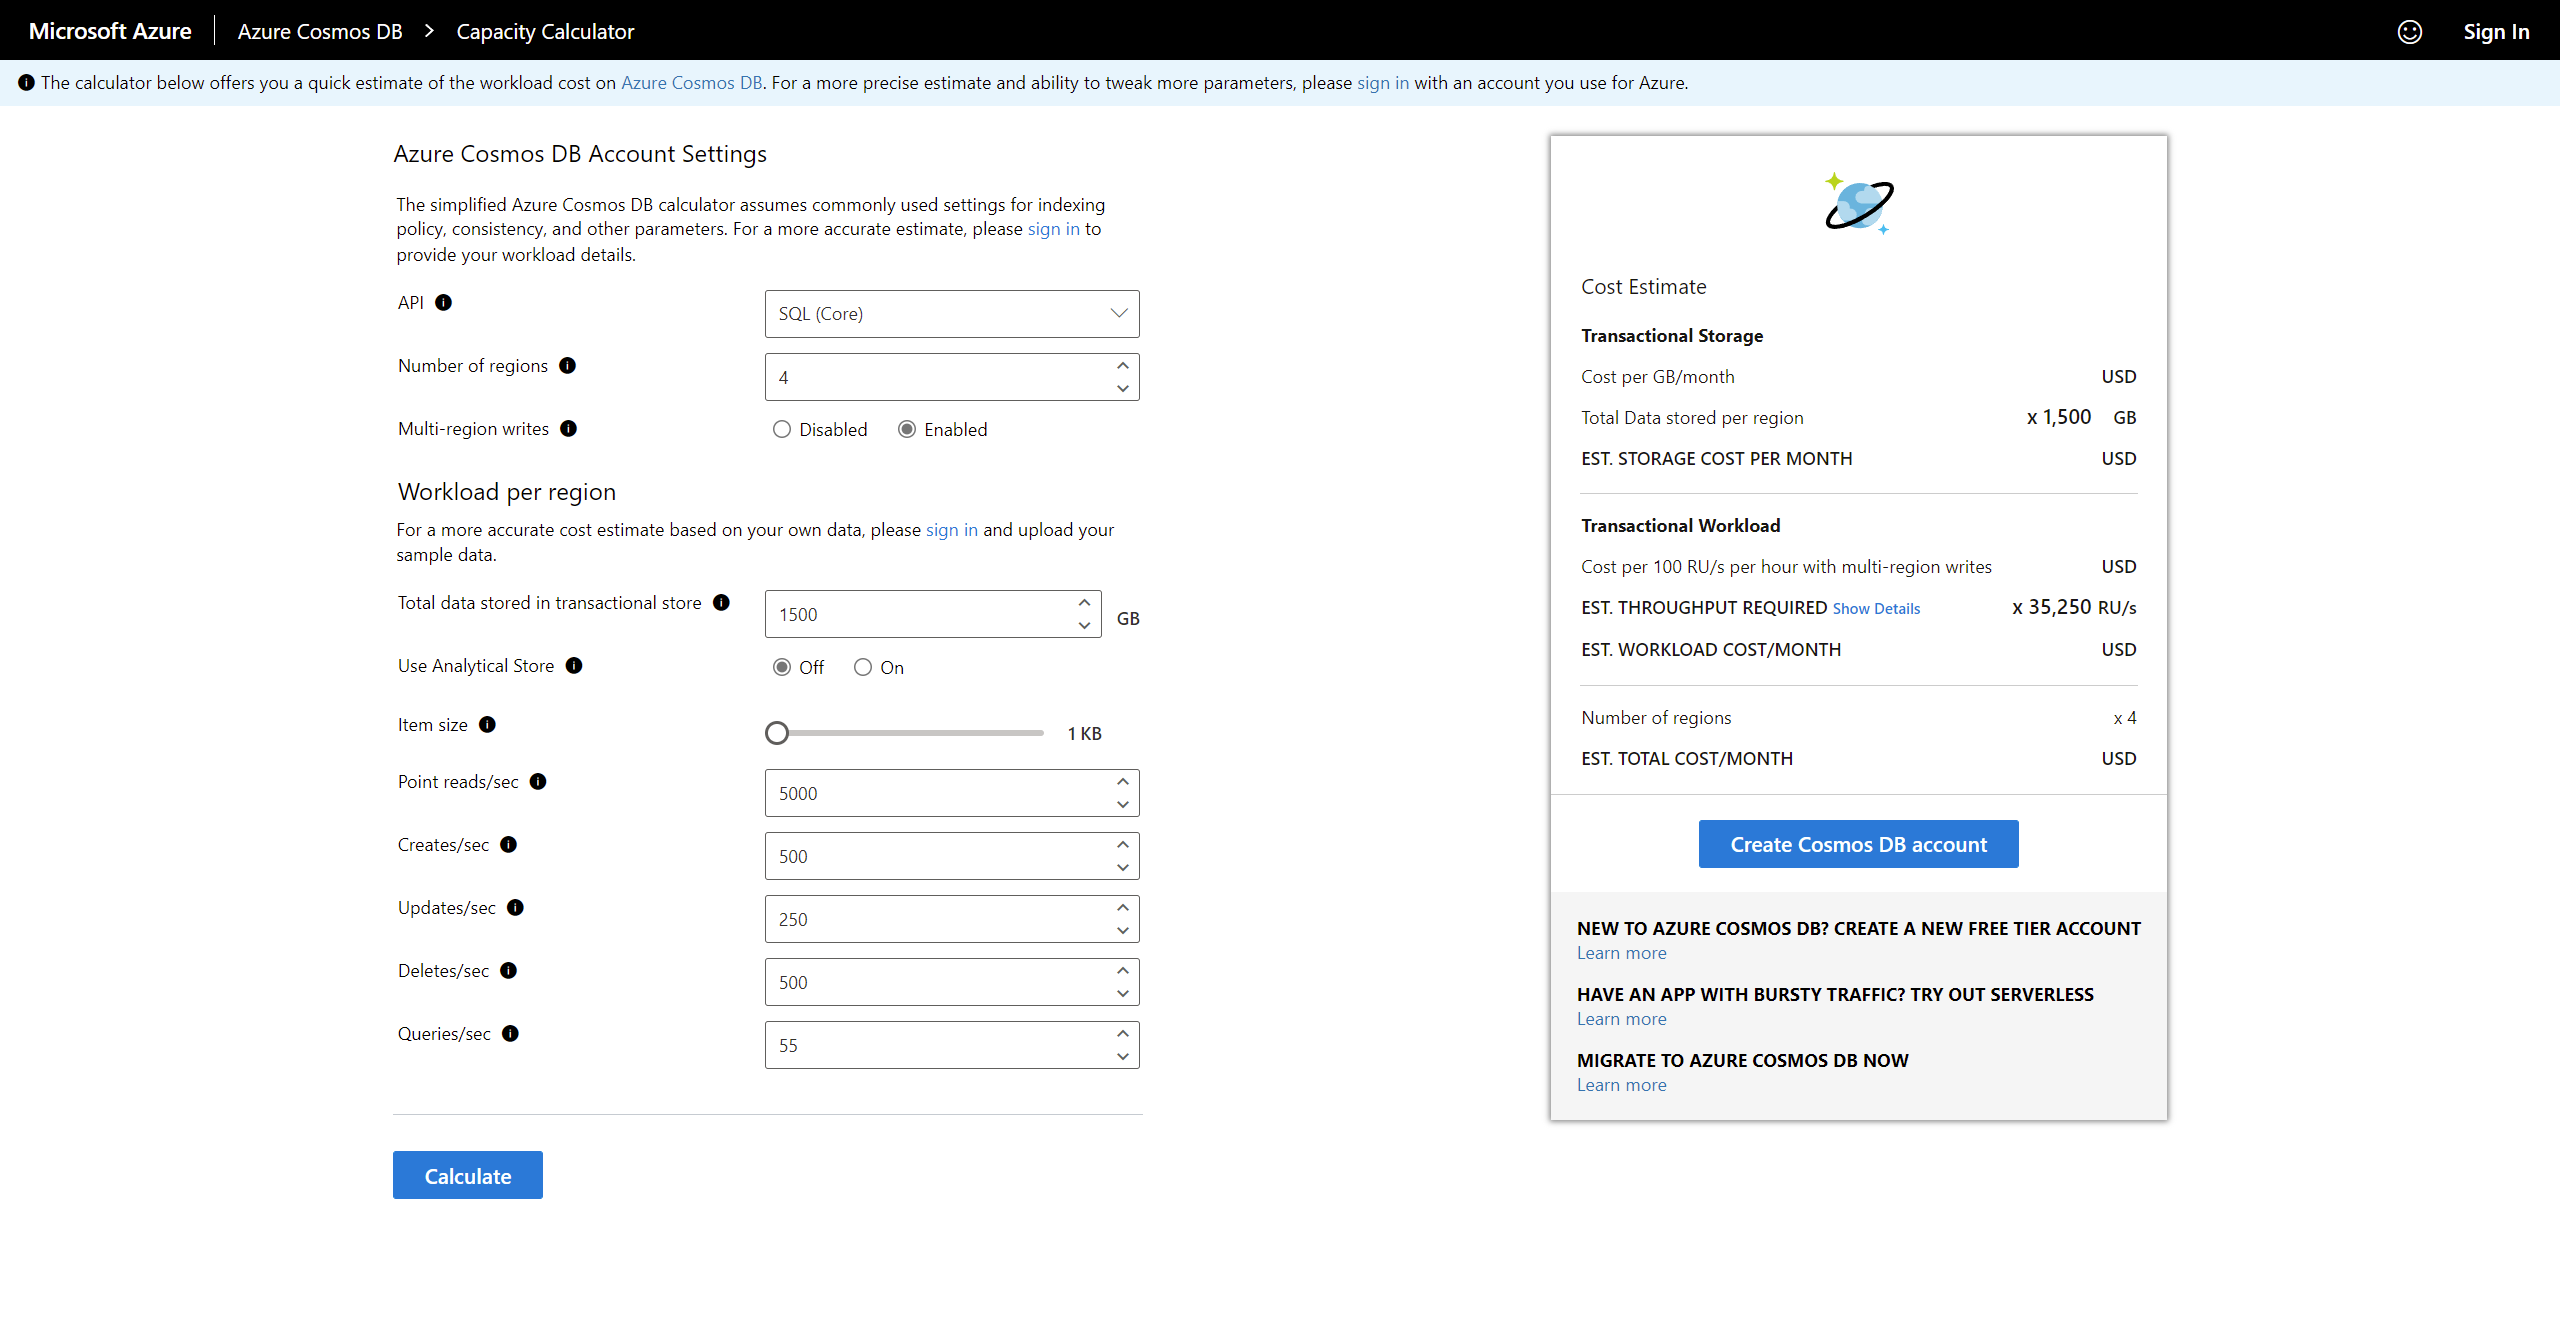 How To Set Up Azure Cosmosdb Database Guide For Beginners